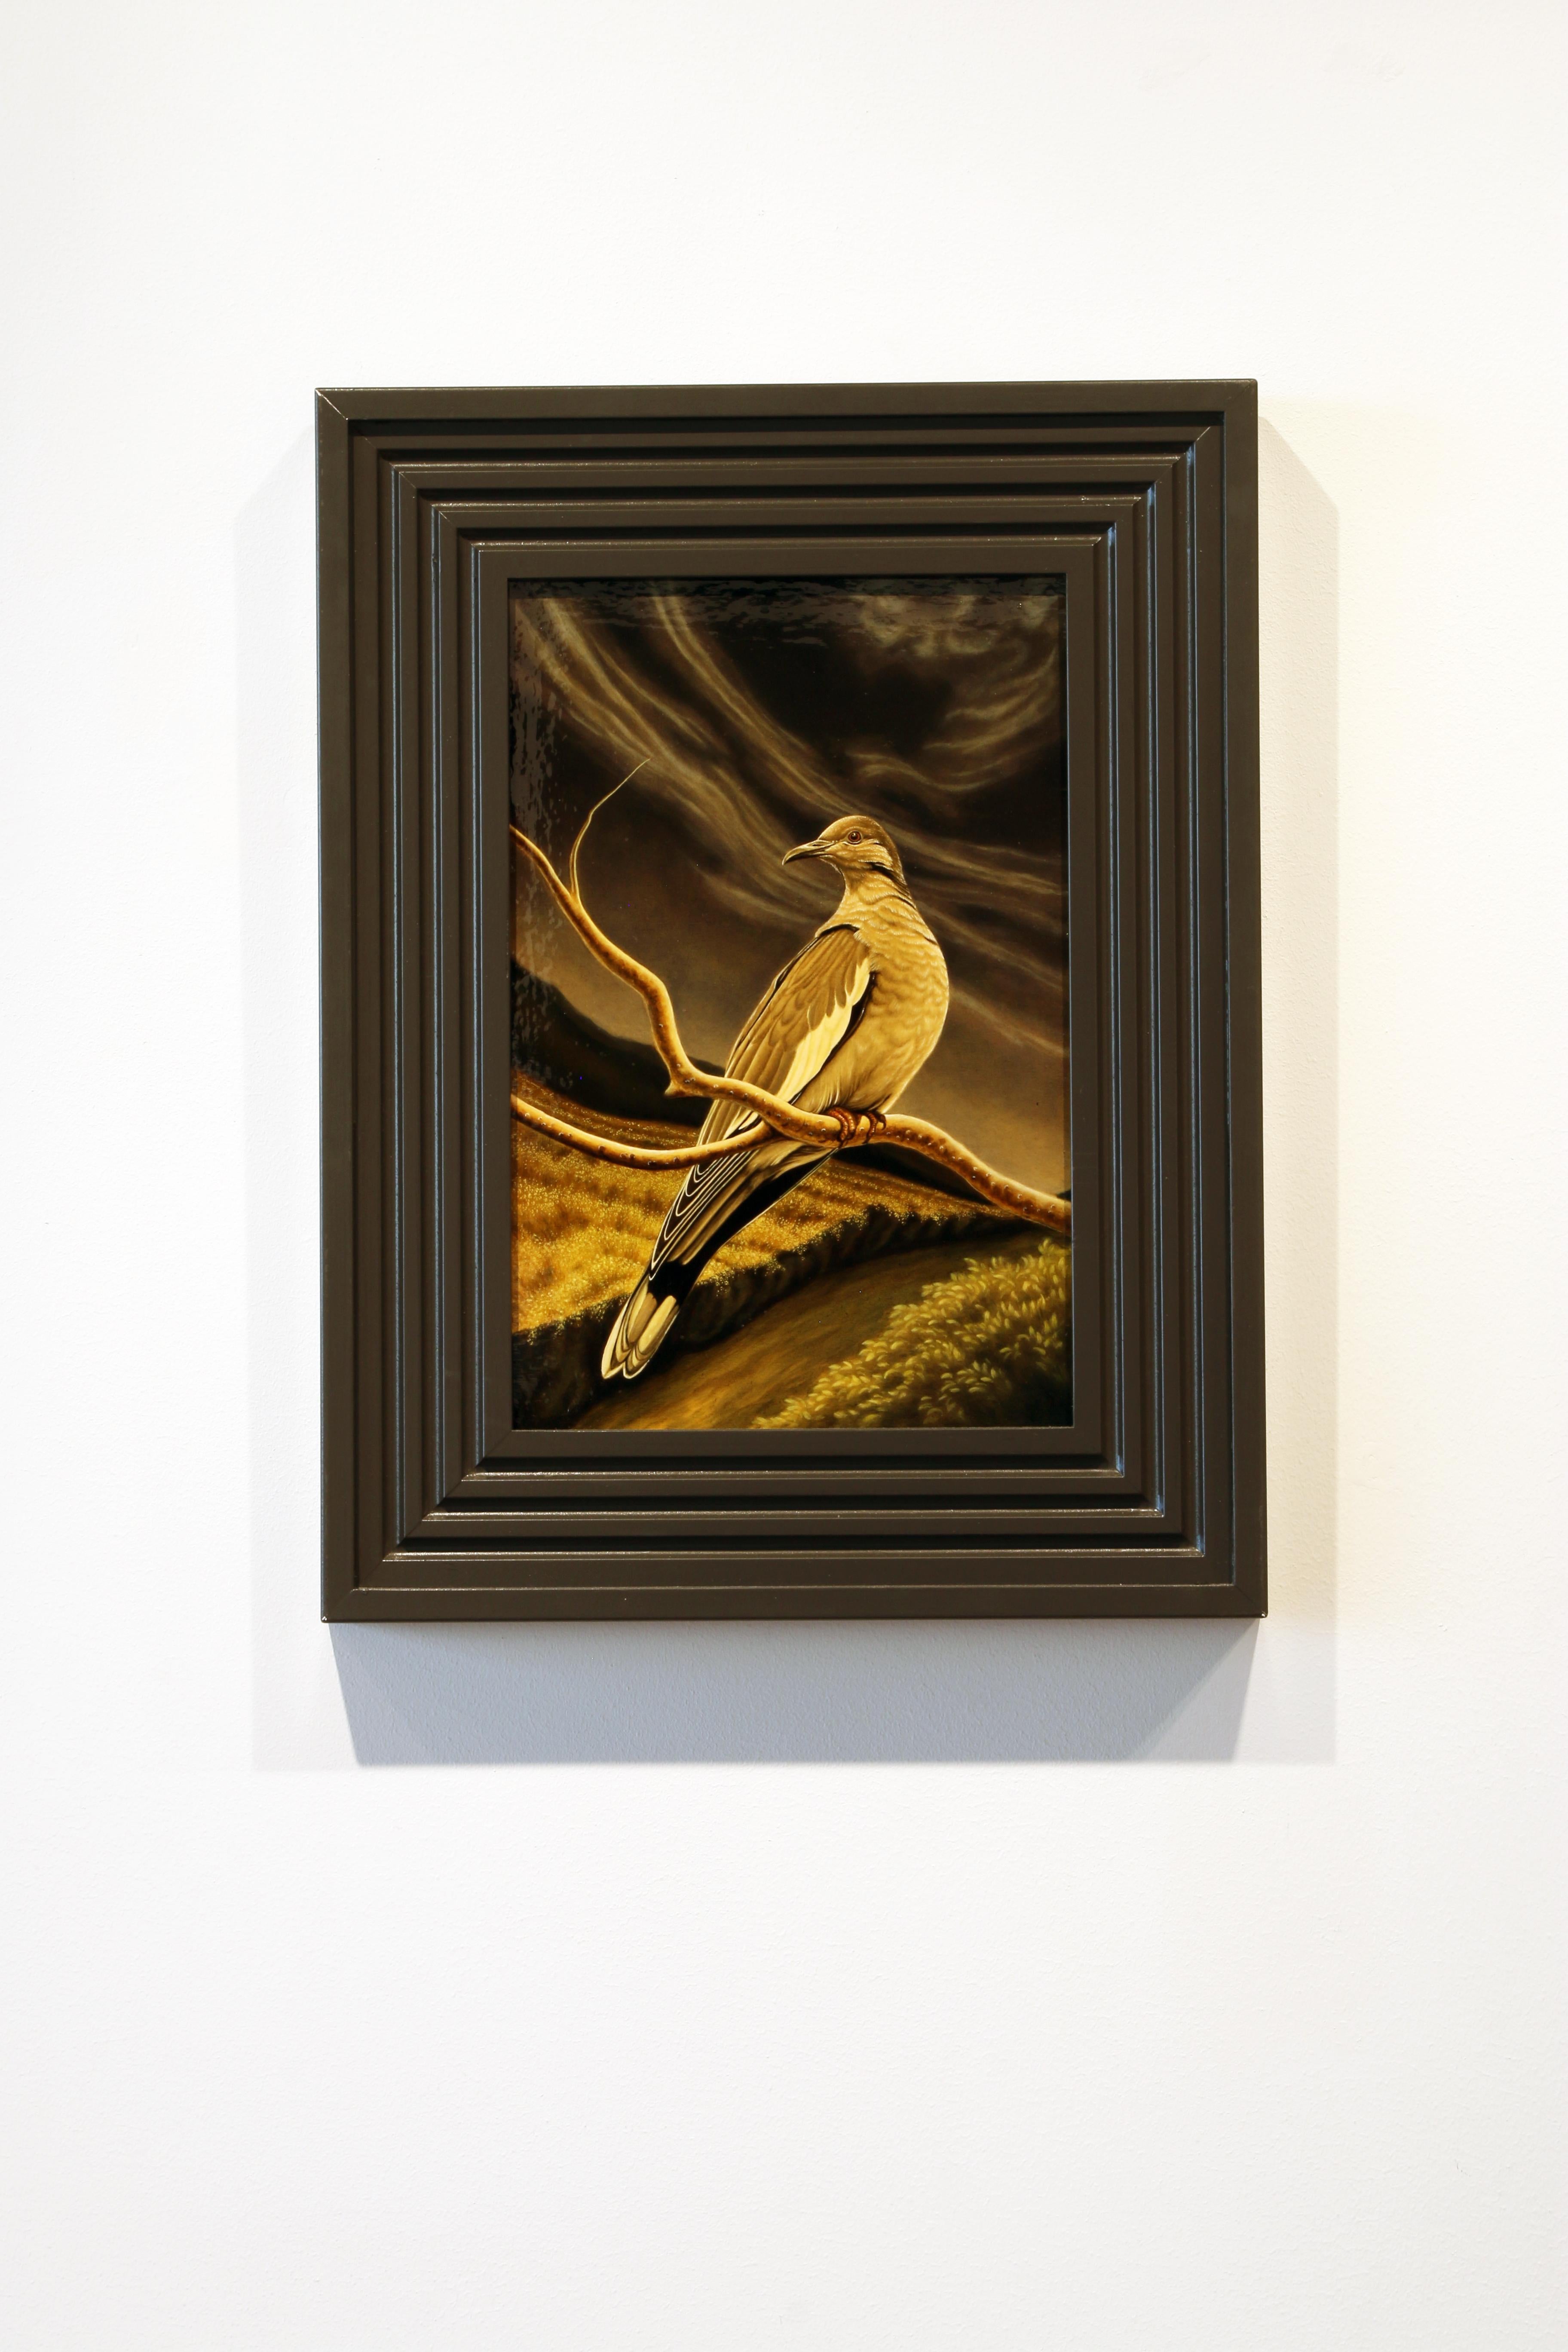 Apparition, 2008, oil on panel, 18x15 in. framed to 25.25 x 19.25 in. - Contemporary Painting by Linda Jo Nazarenus